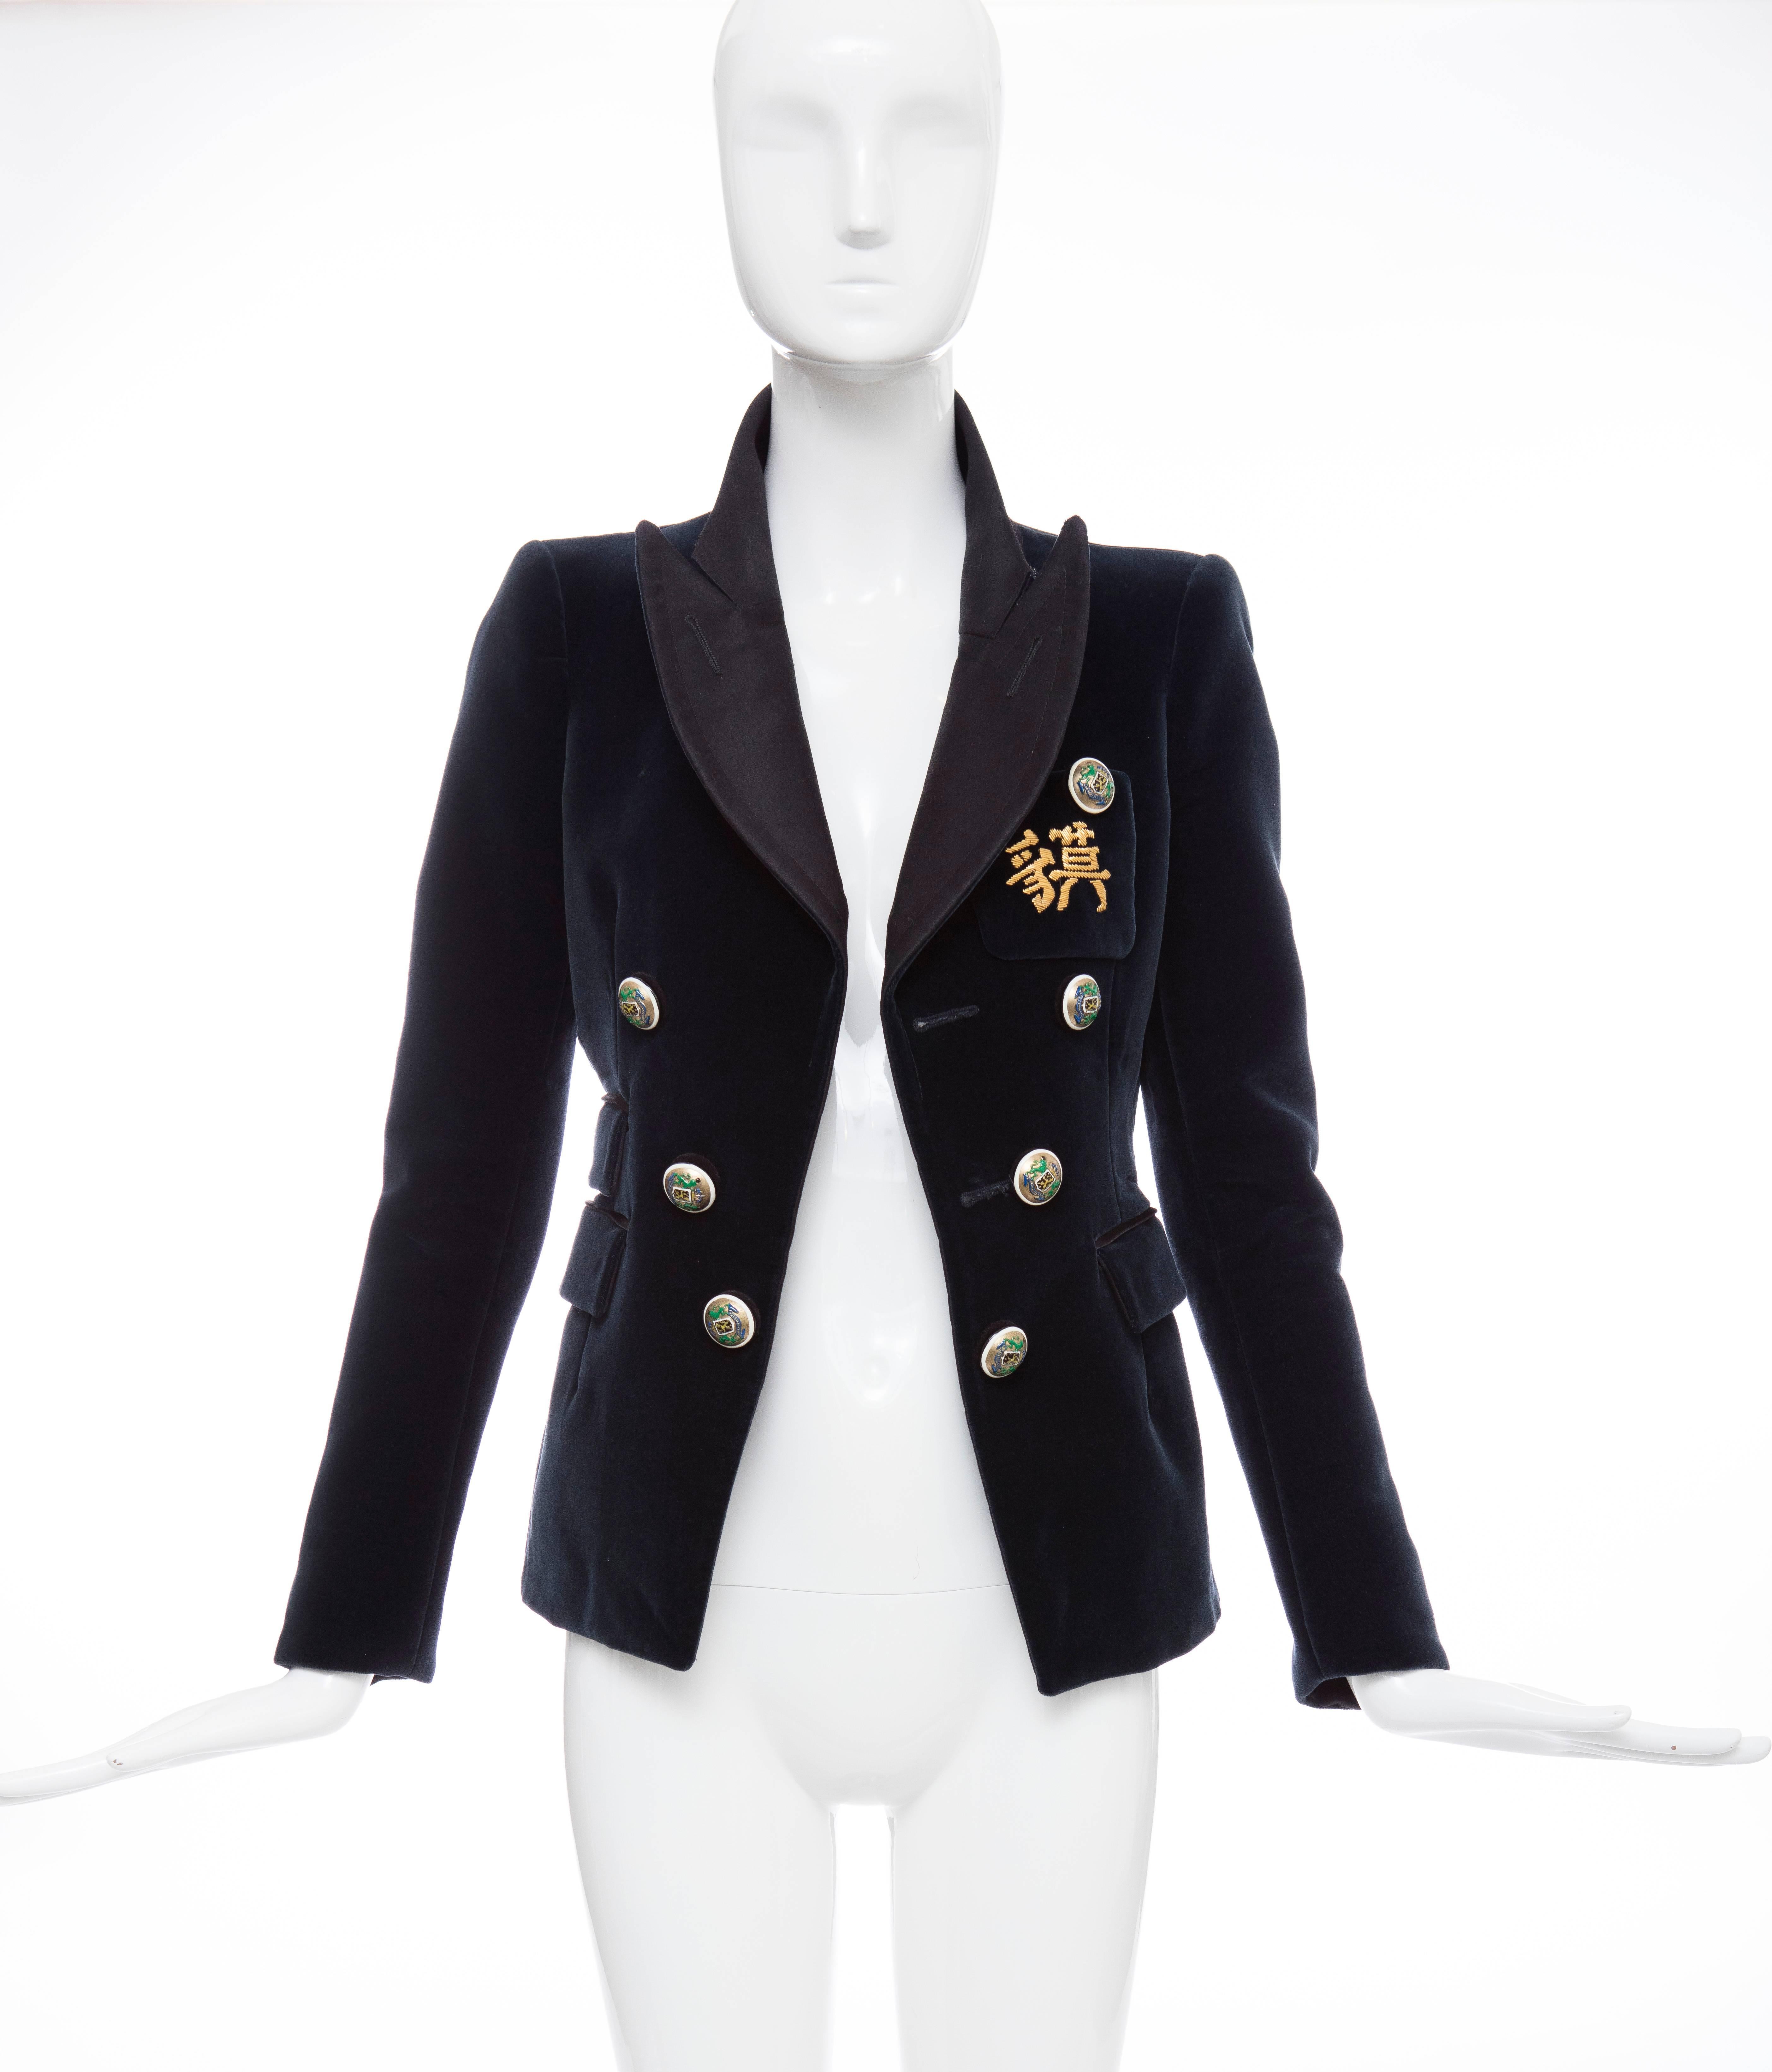 Nicolas Ghesquière for Balenciaga, Autumn-Winter 2007 navy cotton velvet blazer featuring notched lapels, three flap pockets, embroidered patch pocket at bust, engraved button closures at front and fully lined in silk.

FR. 36
US. 4

Bust 34, Waist